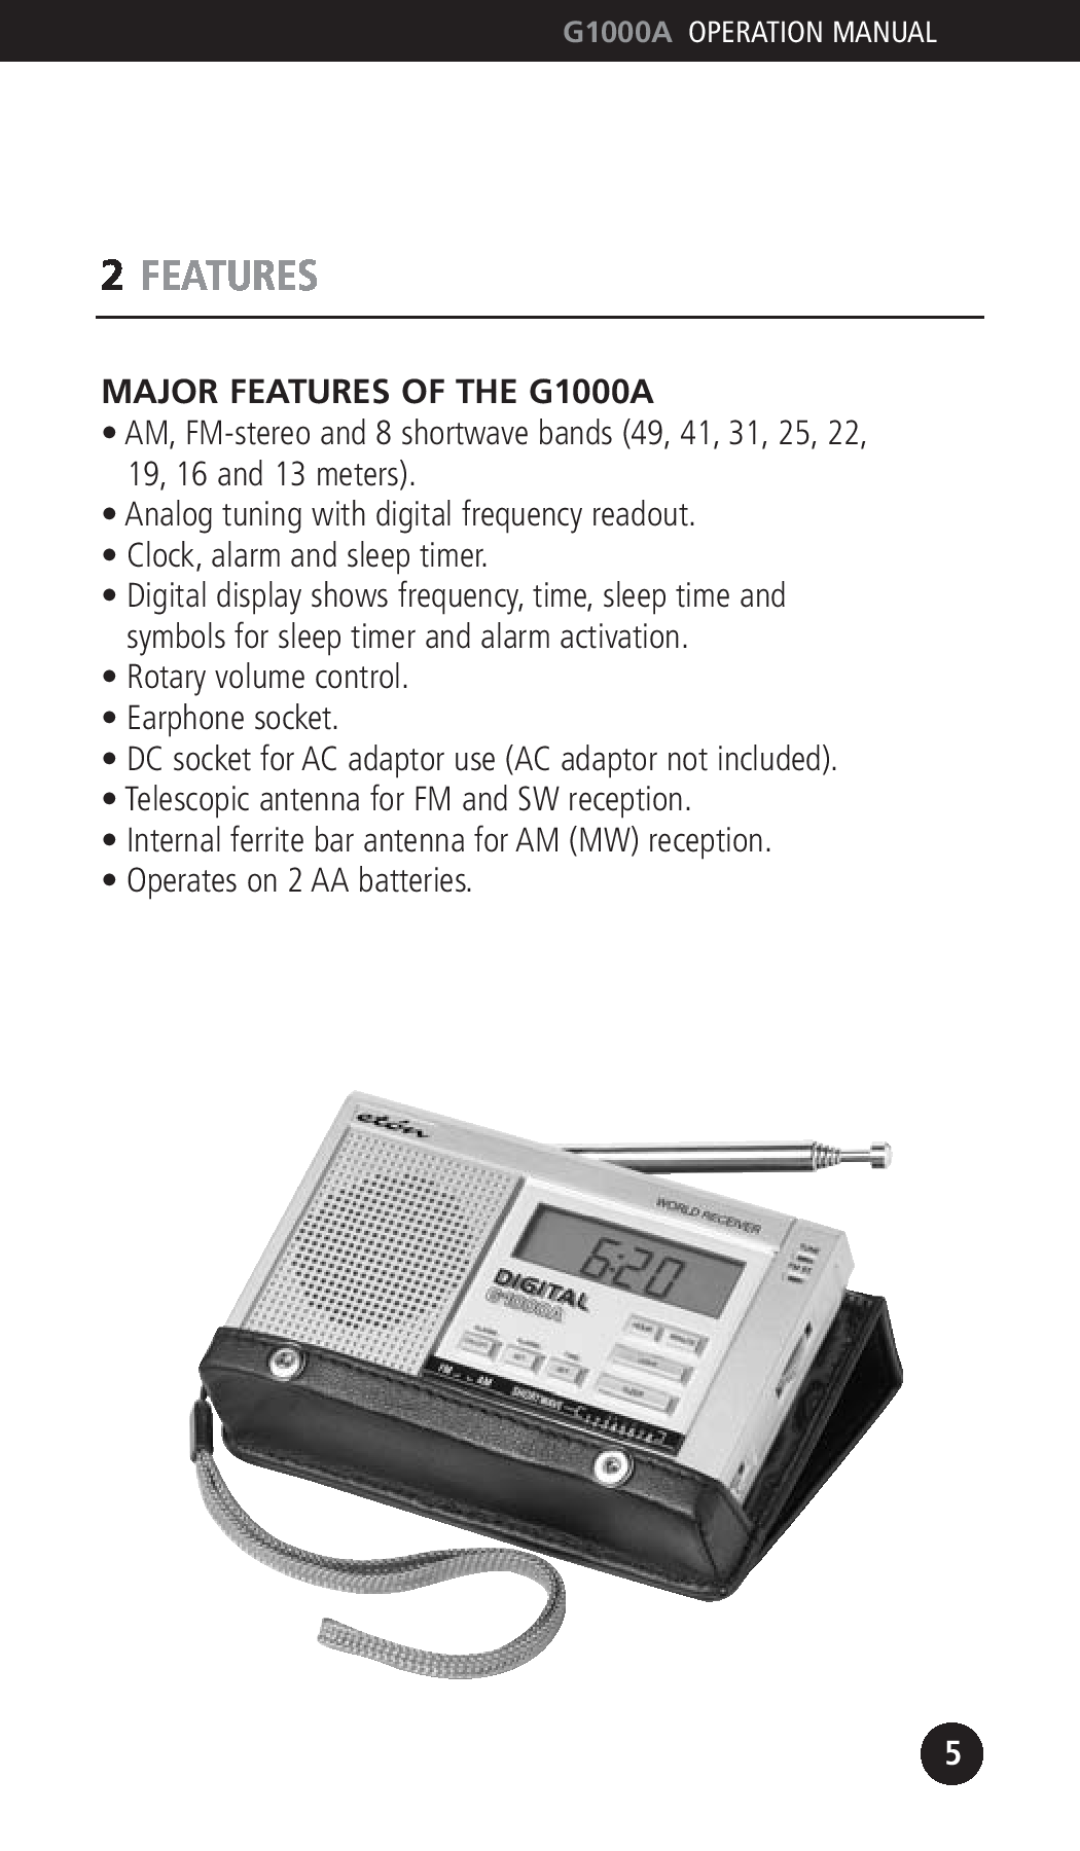 Eton operation manual 2FEATURES, MAJOR FEATURES OF THE G1000A 